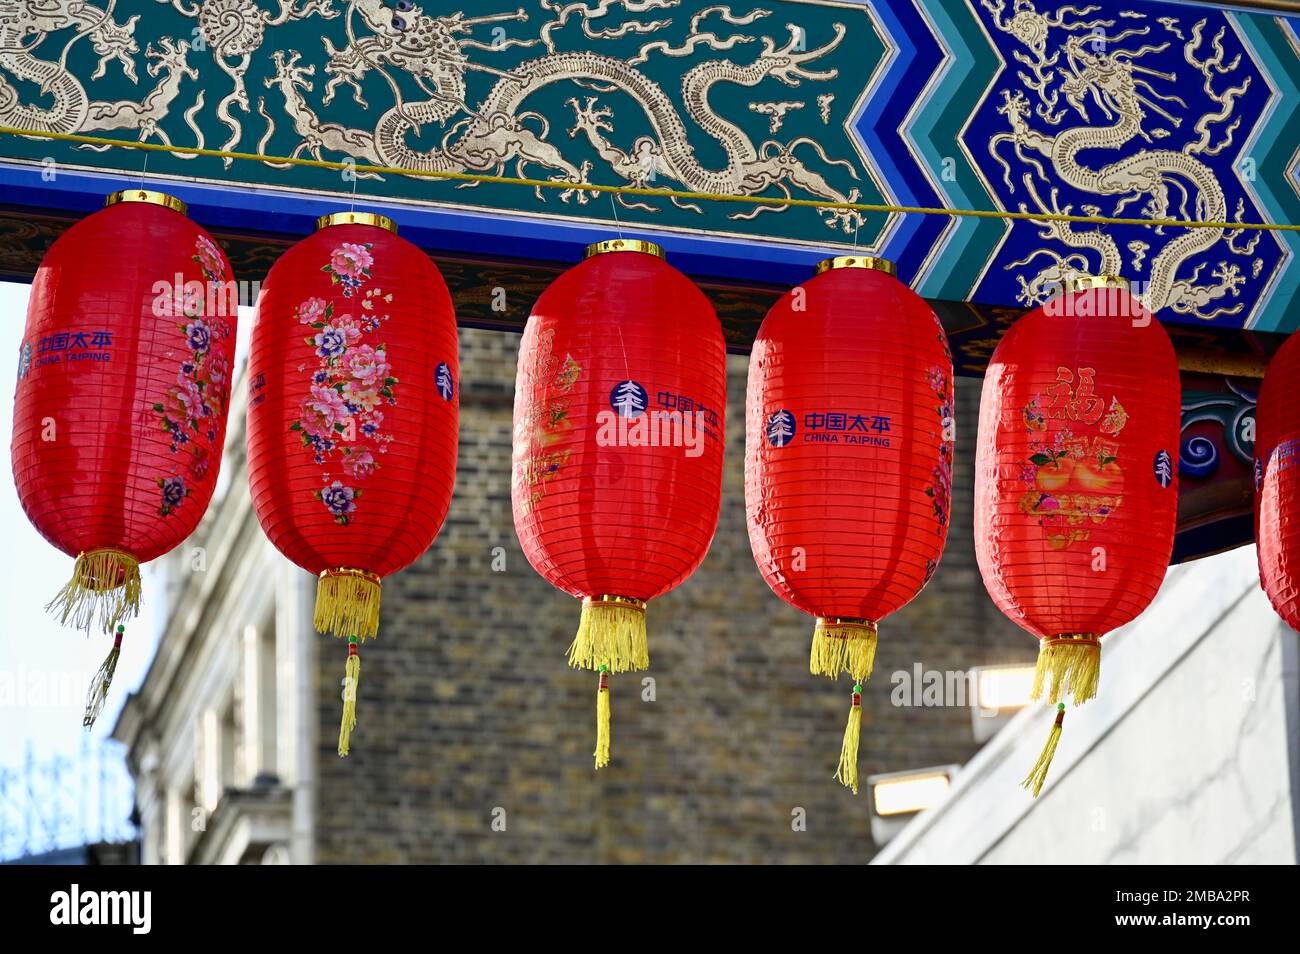 New Red lanterns were hung in Chinatown to welcome in the year of the Rabbit. Chinatown, London. UK Stock Photo